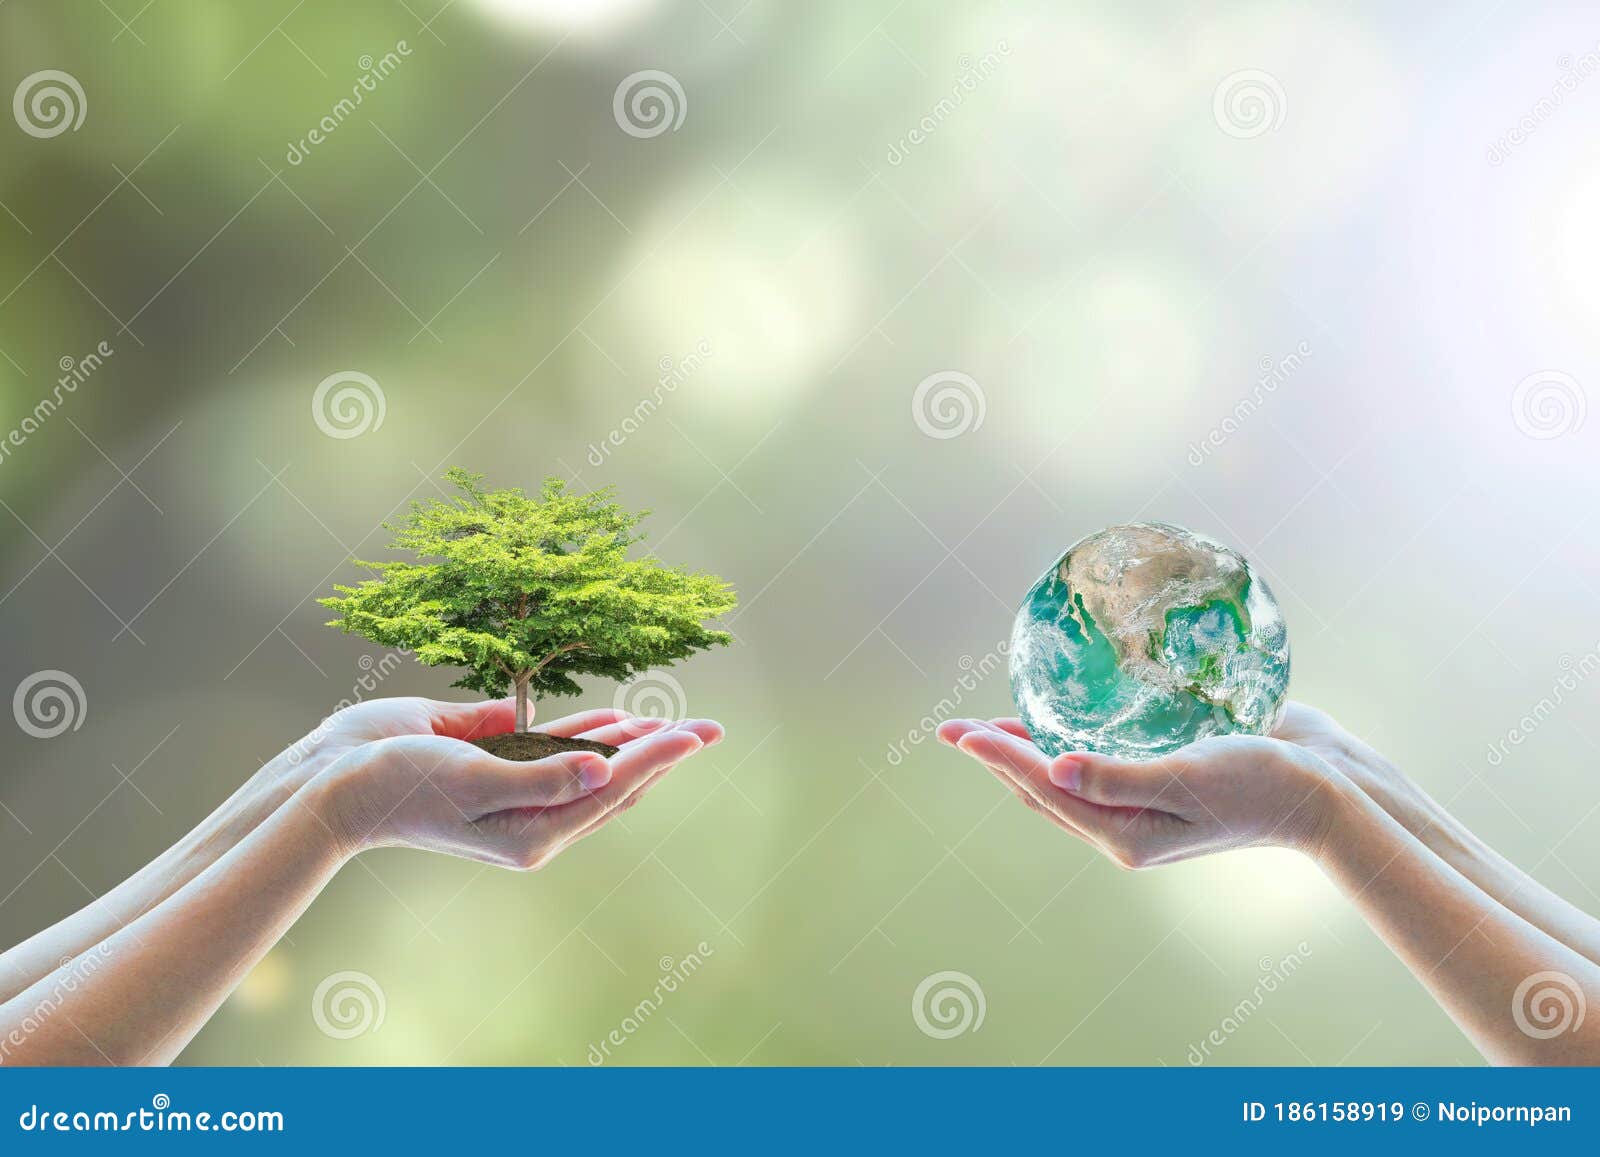 two people human hands holding/ saving growing big tree on soil eco bio globe in clean csr esg natural sunlight background